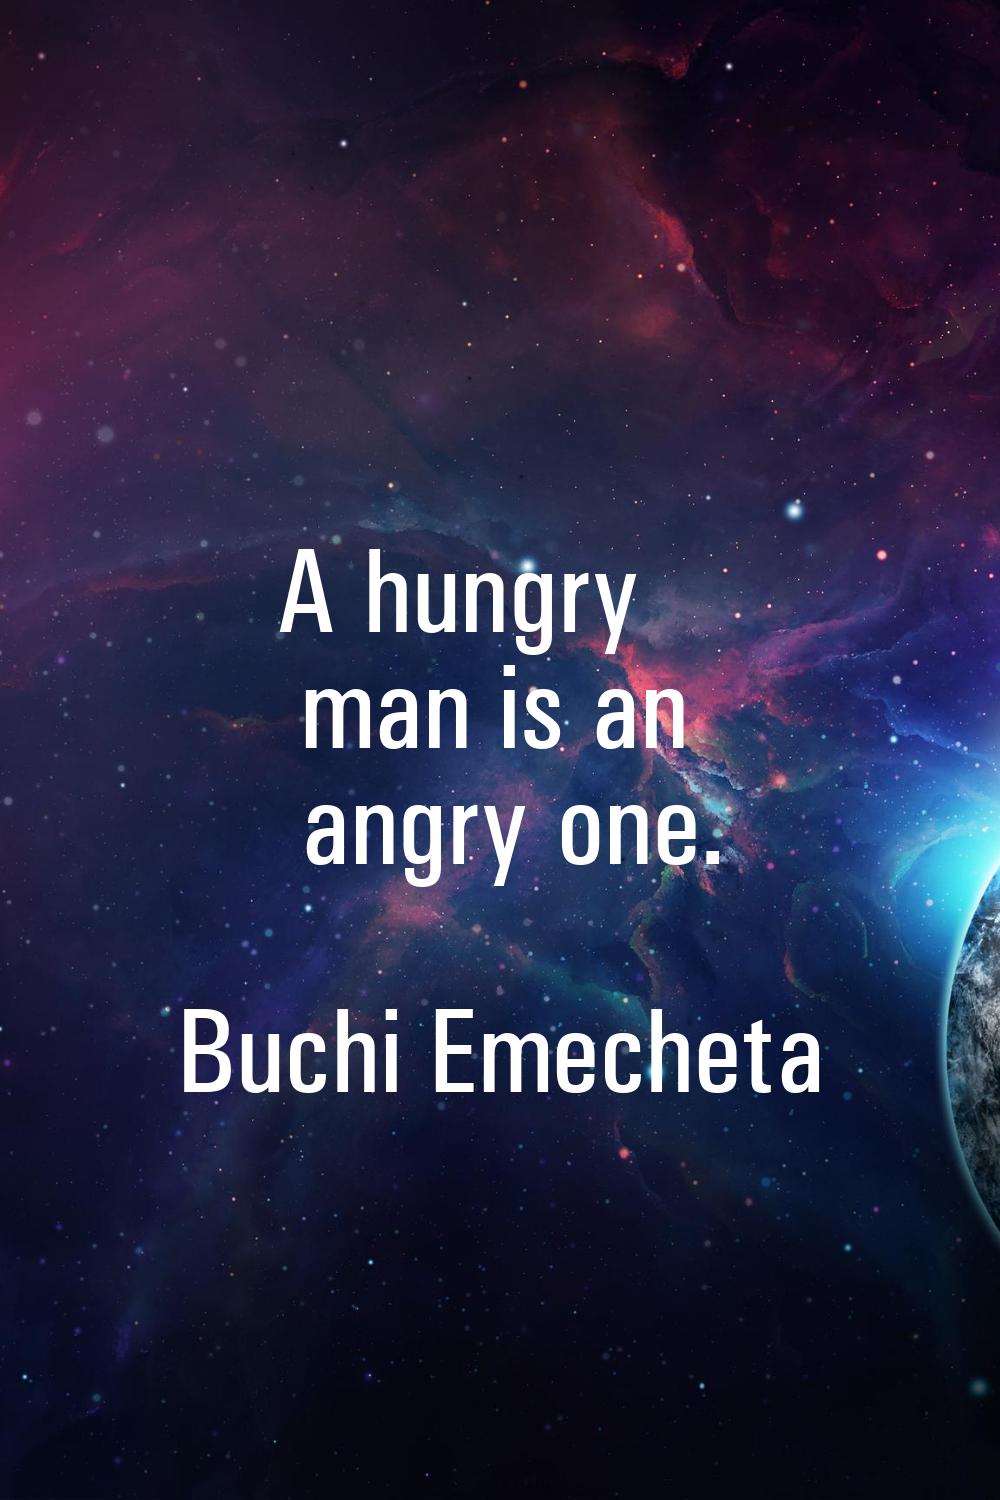 A hungry man is an angry one.